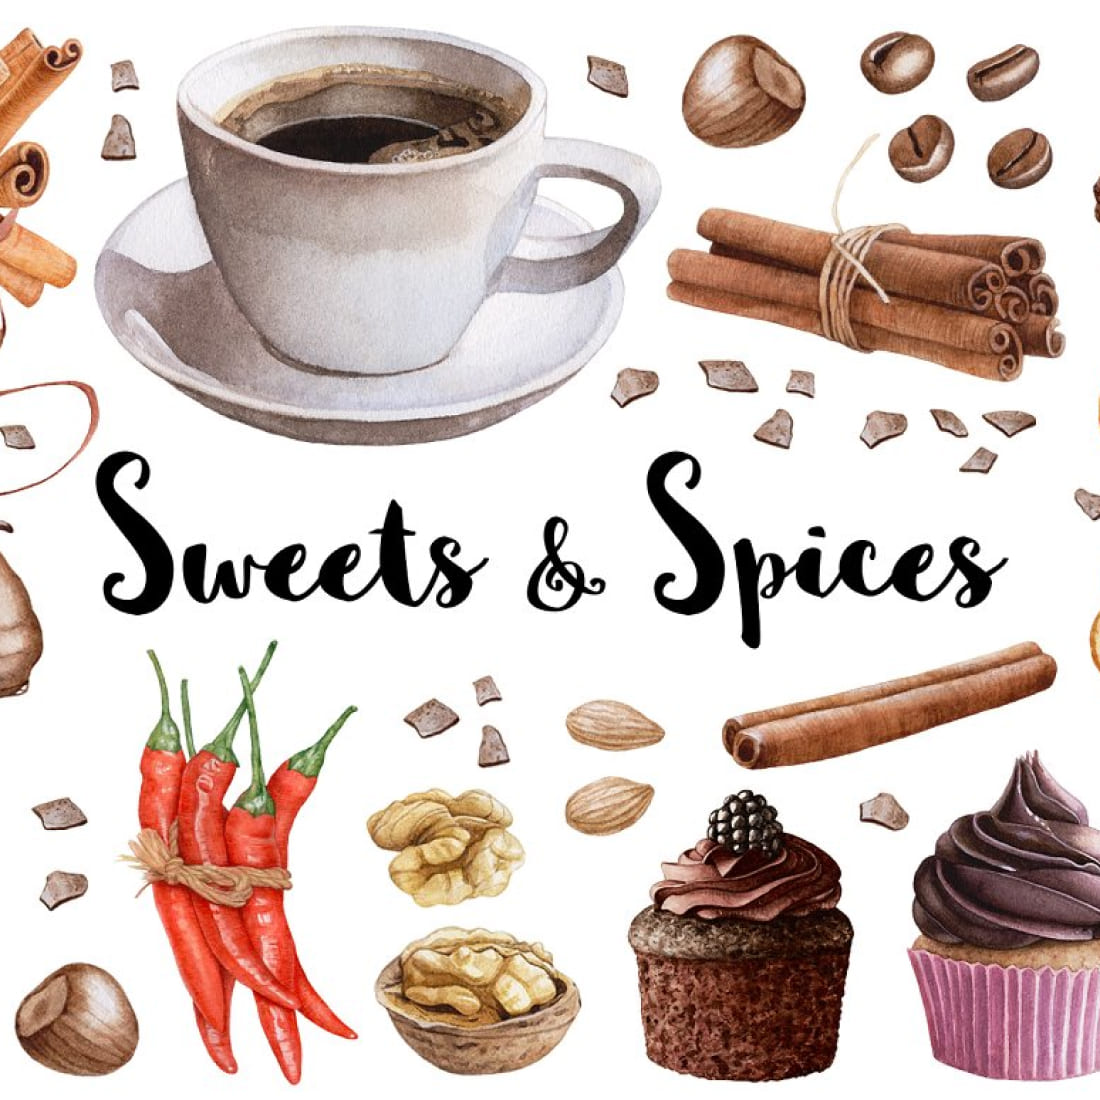 Watercolor Sweets & Spices.